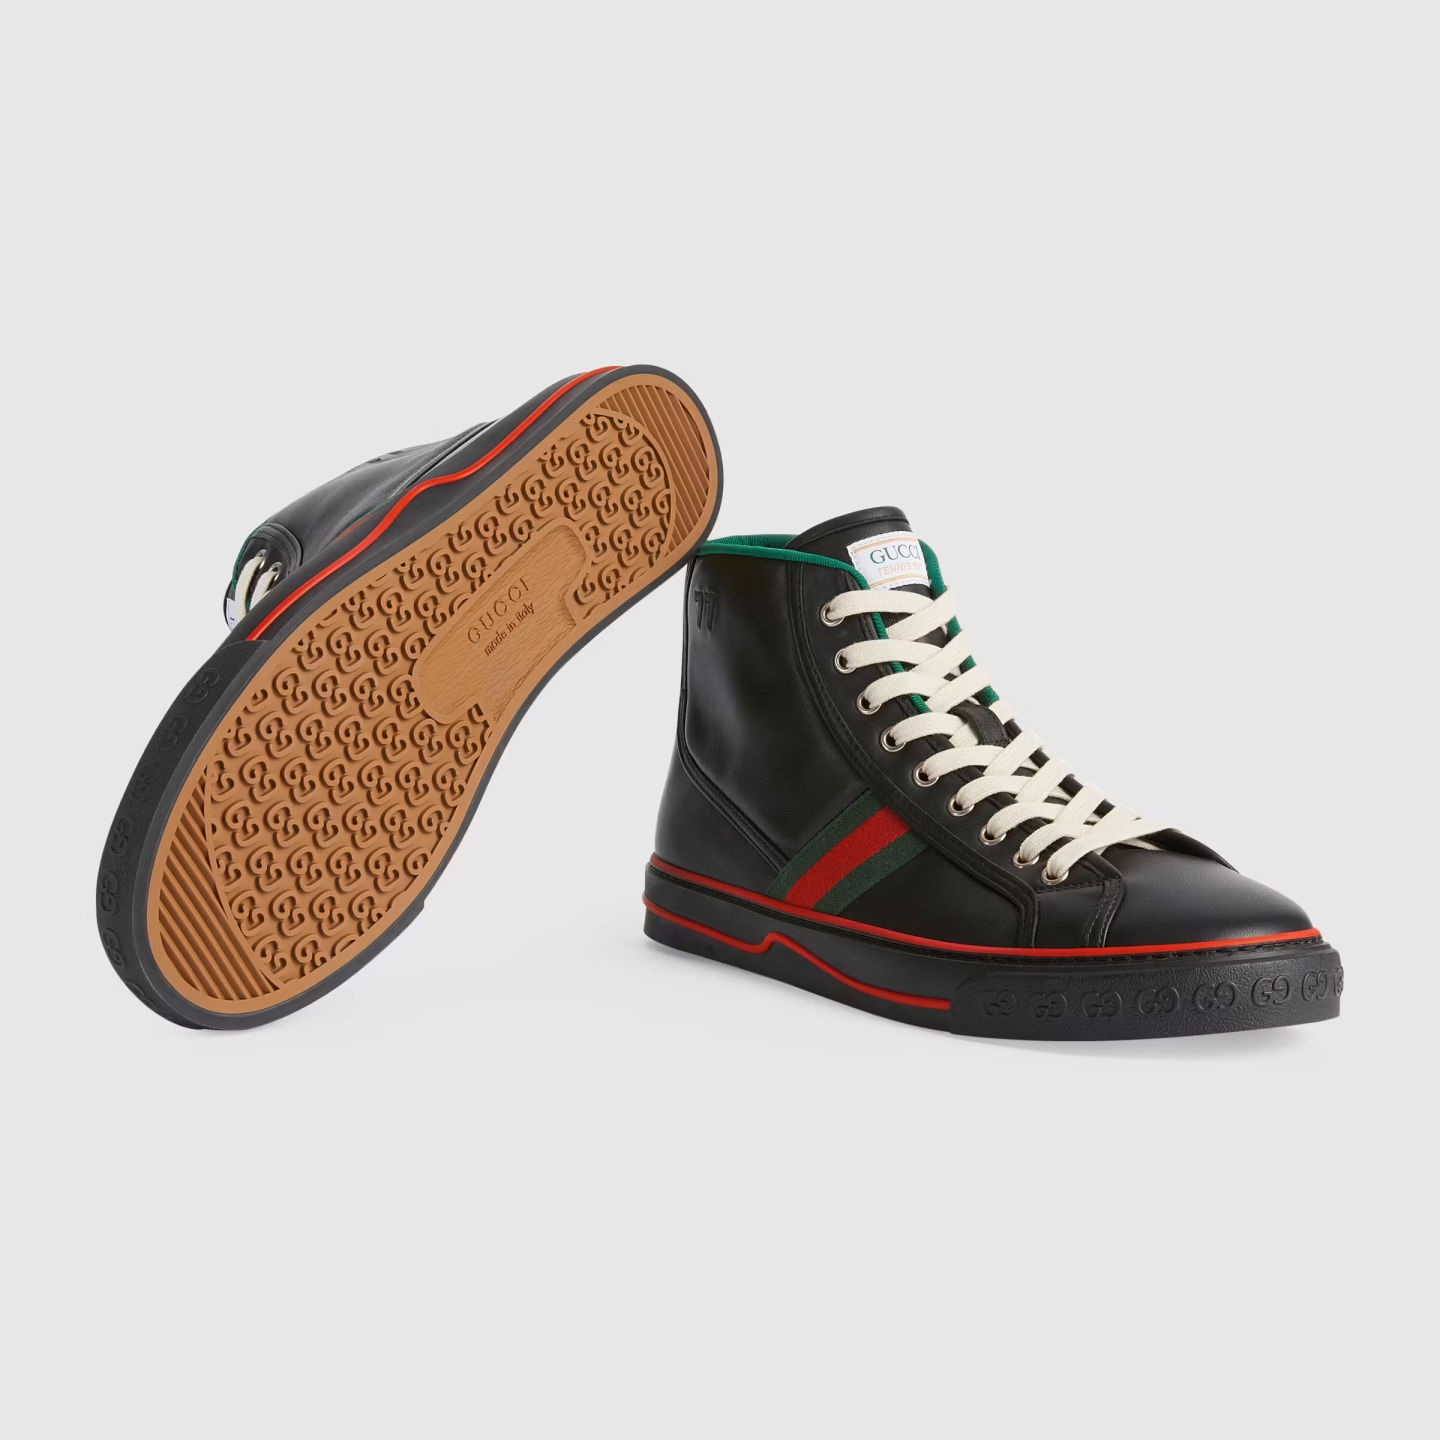 Best Gucci Sneakers - Read This First